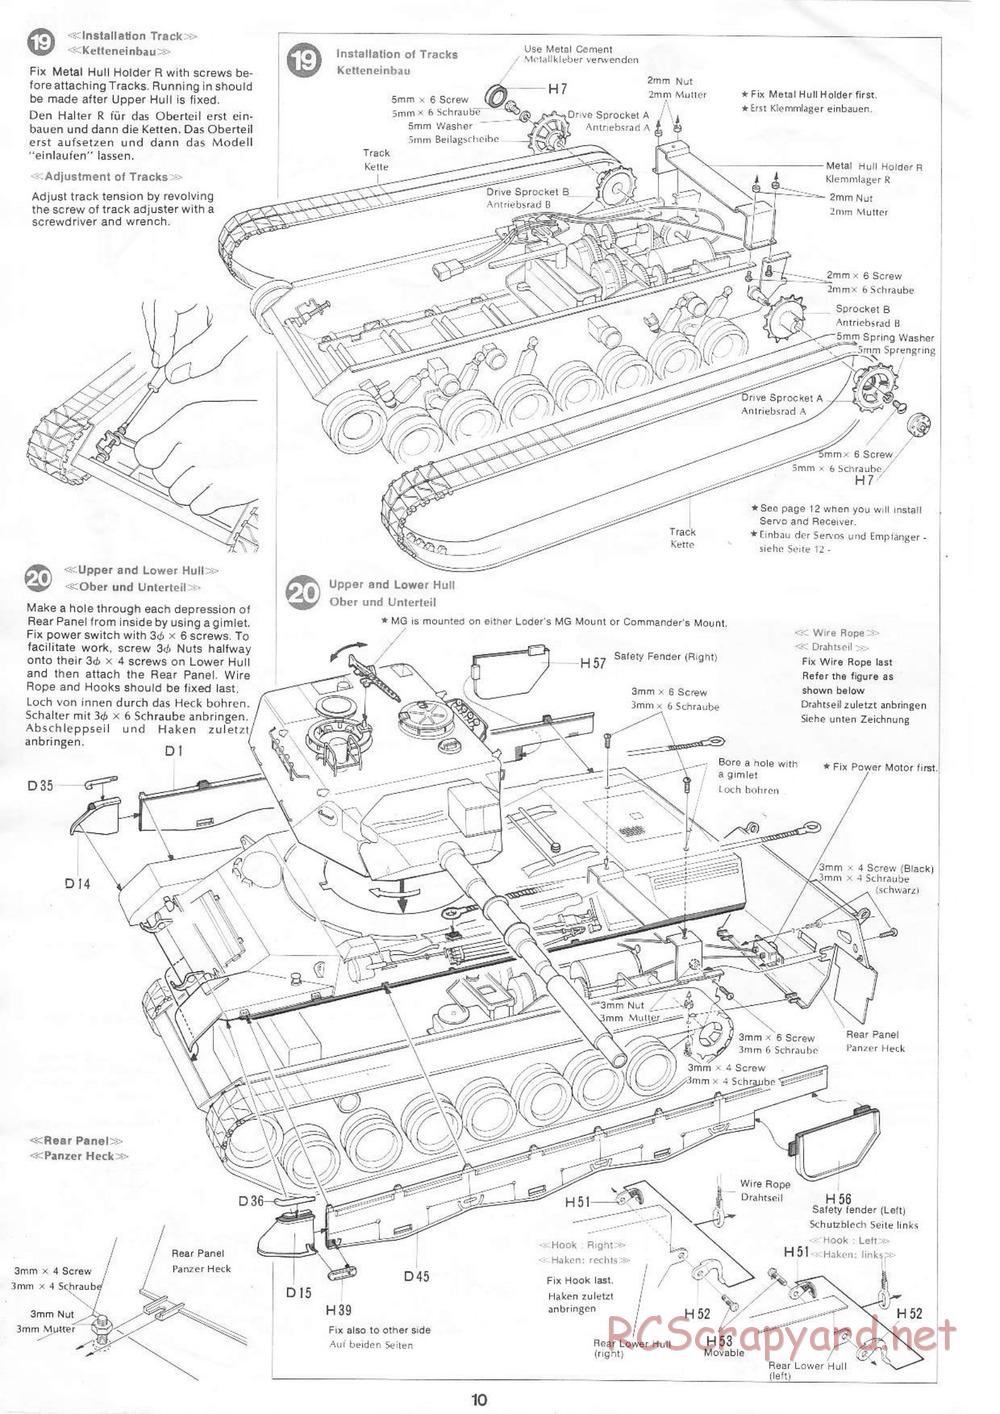 Tamiya - Leopard A4 - 1/16 Scale Chassis - Manual - Page 10